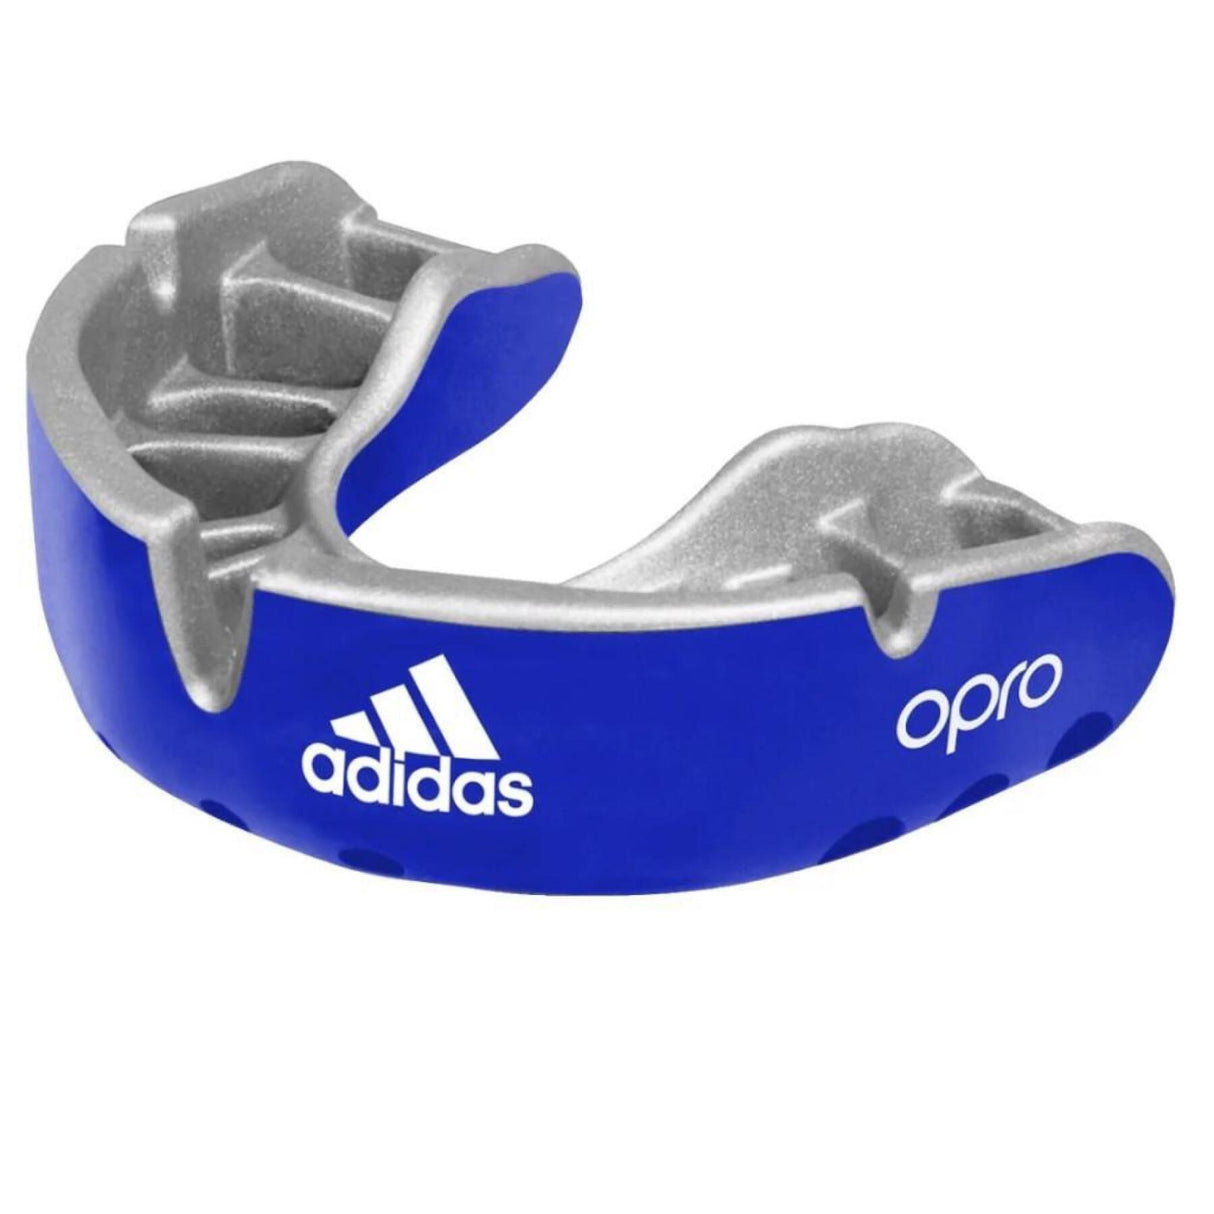 Adidas Opro Mouthguard GOLD - BLUE | | Absolute Rugby | Absolute Rugby